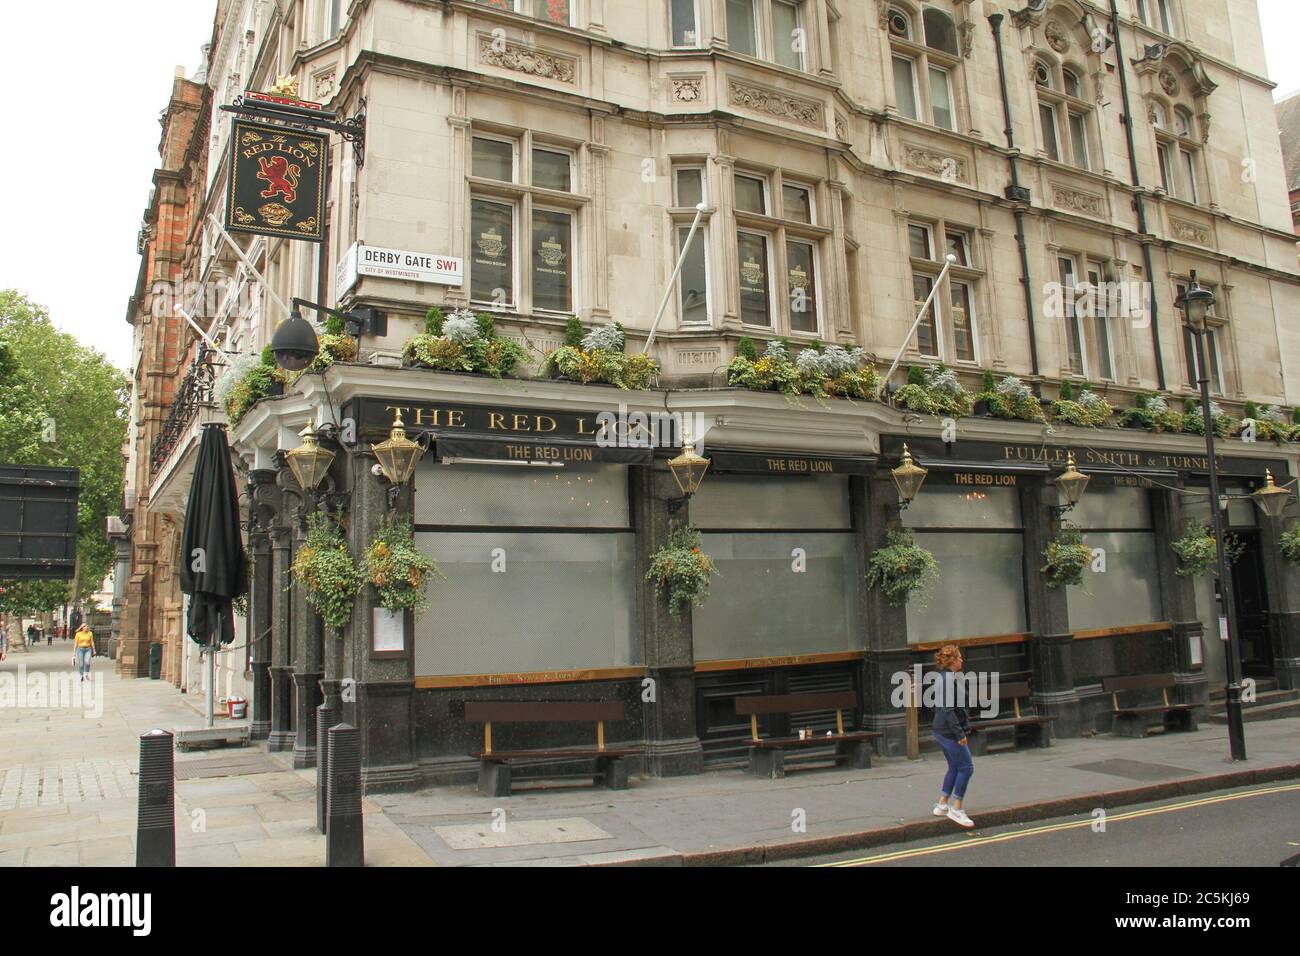 The Red Lion pub in Whitehall, remains boarde d up ahead of the 4th Jully pub oping advice. Daily life in London on a friday ahead of the opening of pubs on the 4th of July as per new Government advice. Stock Photo